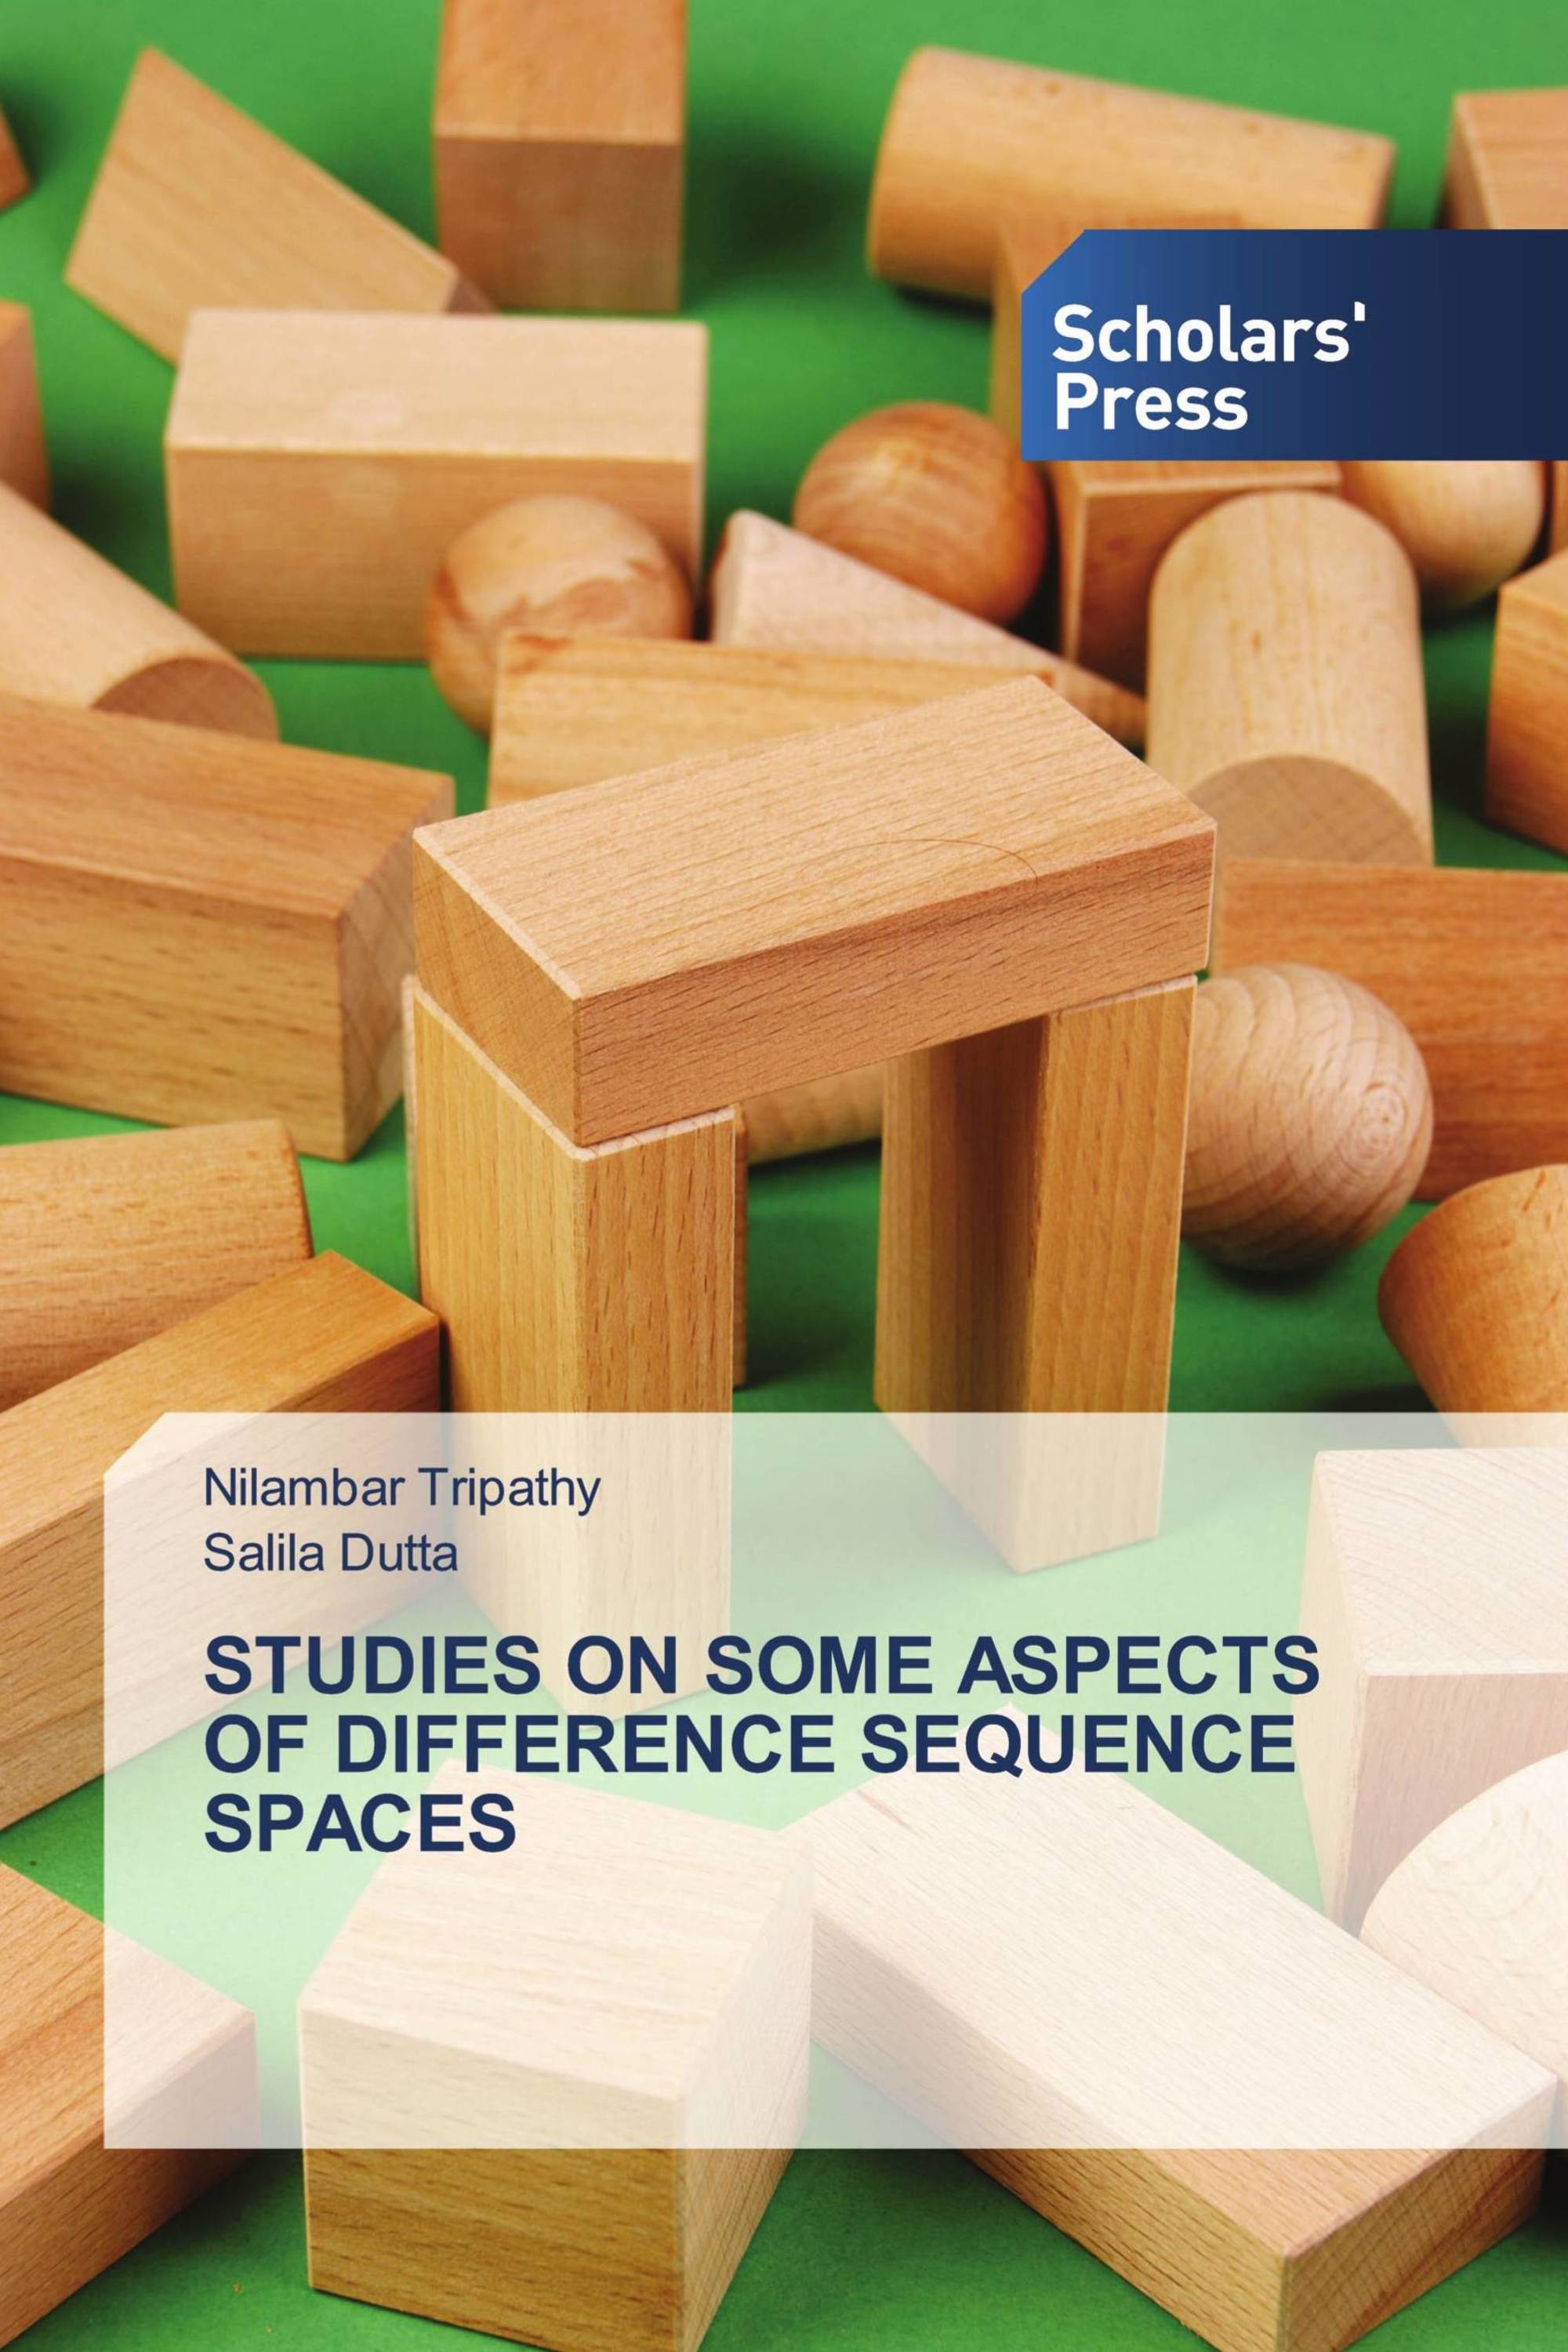 STUDIES ON SOME ASPECTS OF DIFFERENCE SEQUENCE SPACES